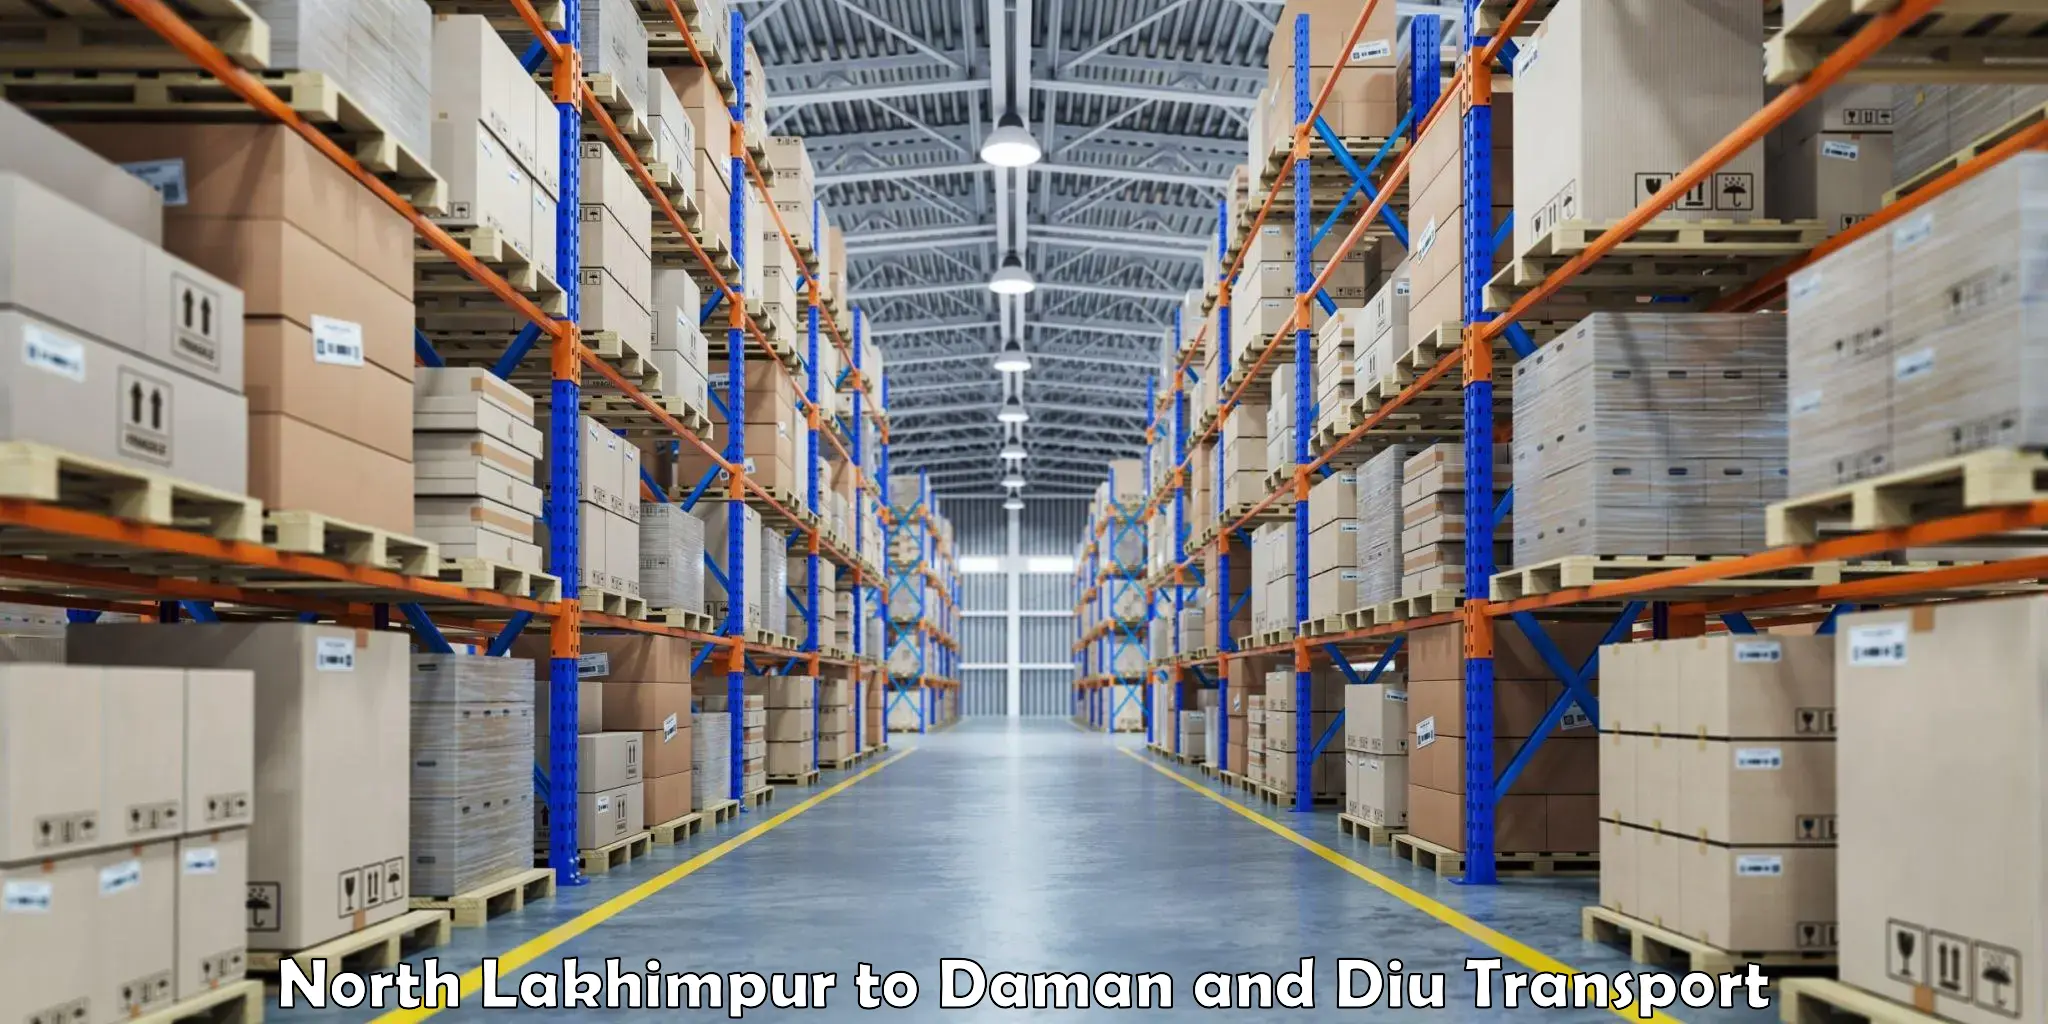 Truck transport companies in India North Lakhimpur to Daman and Diu